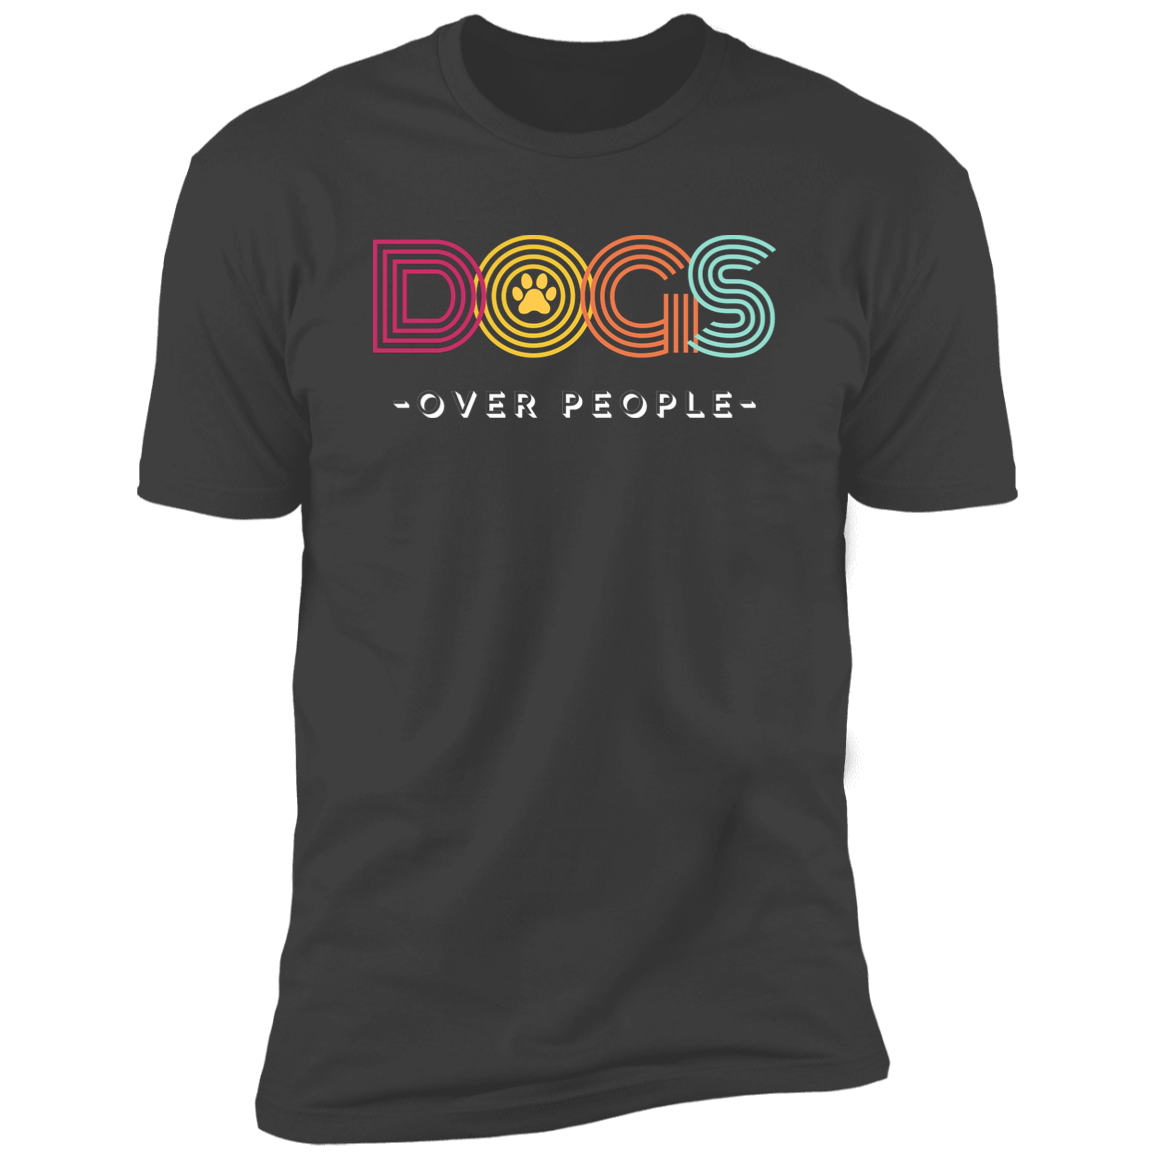 Dogs Over People t-shirt, funny dog shirt for humans, in heavy metal gray